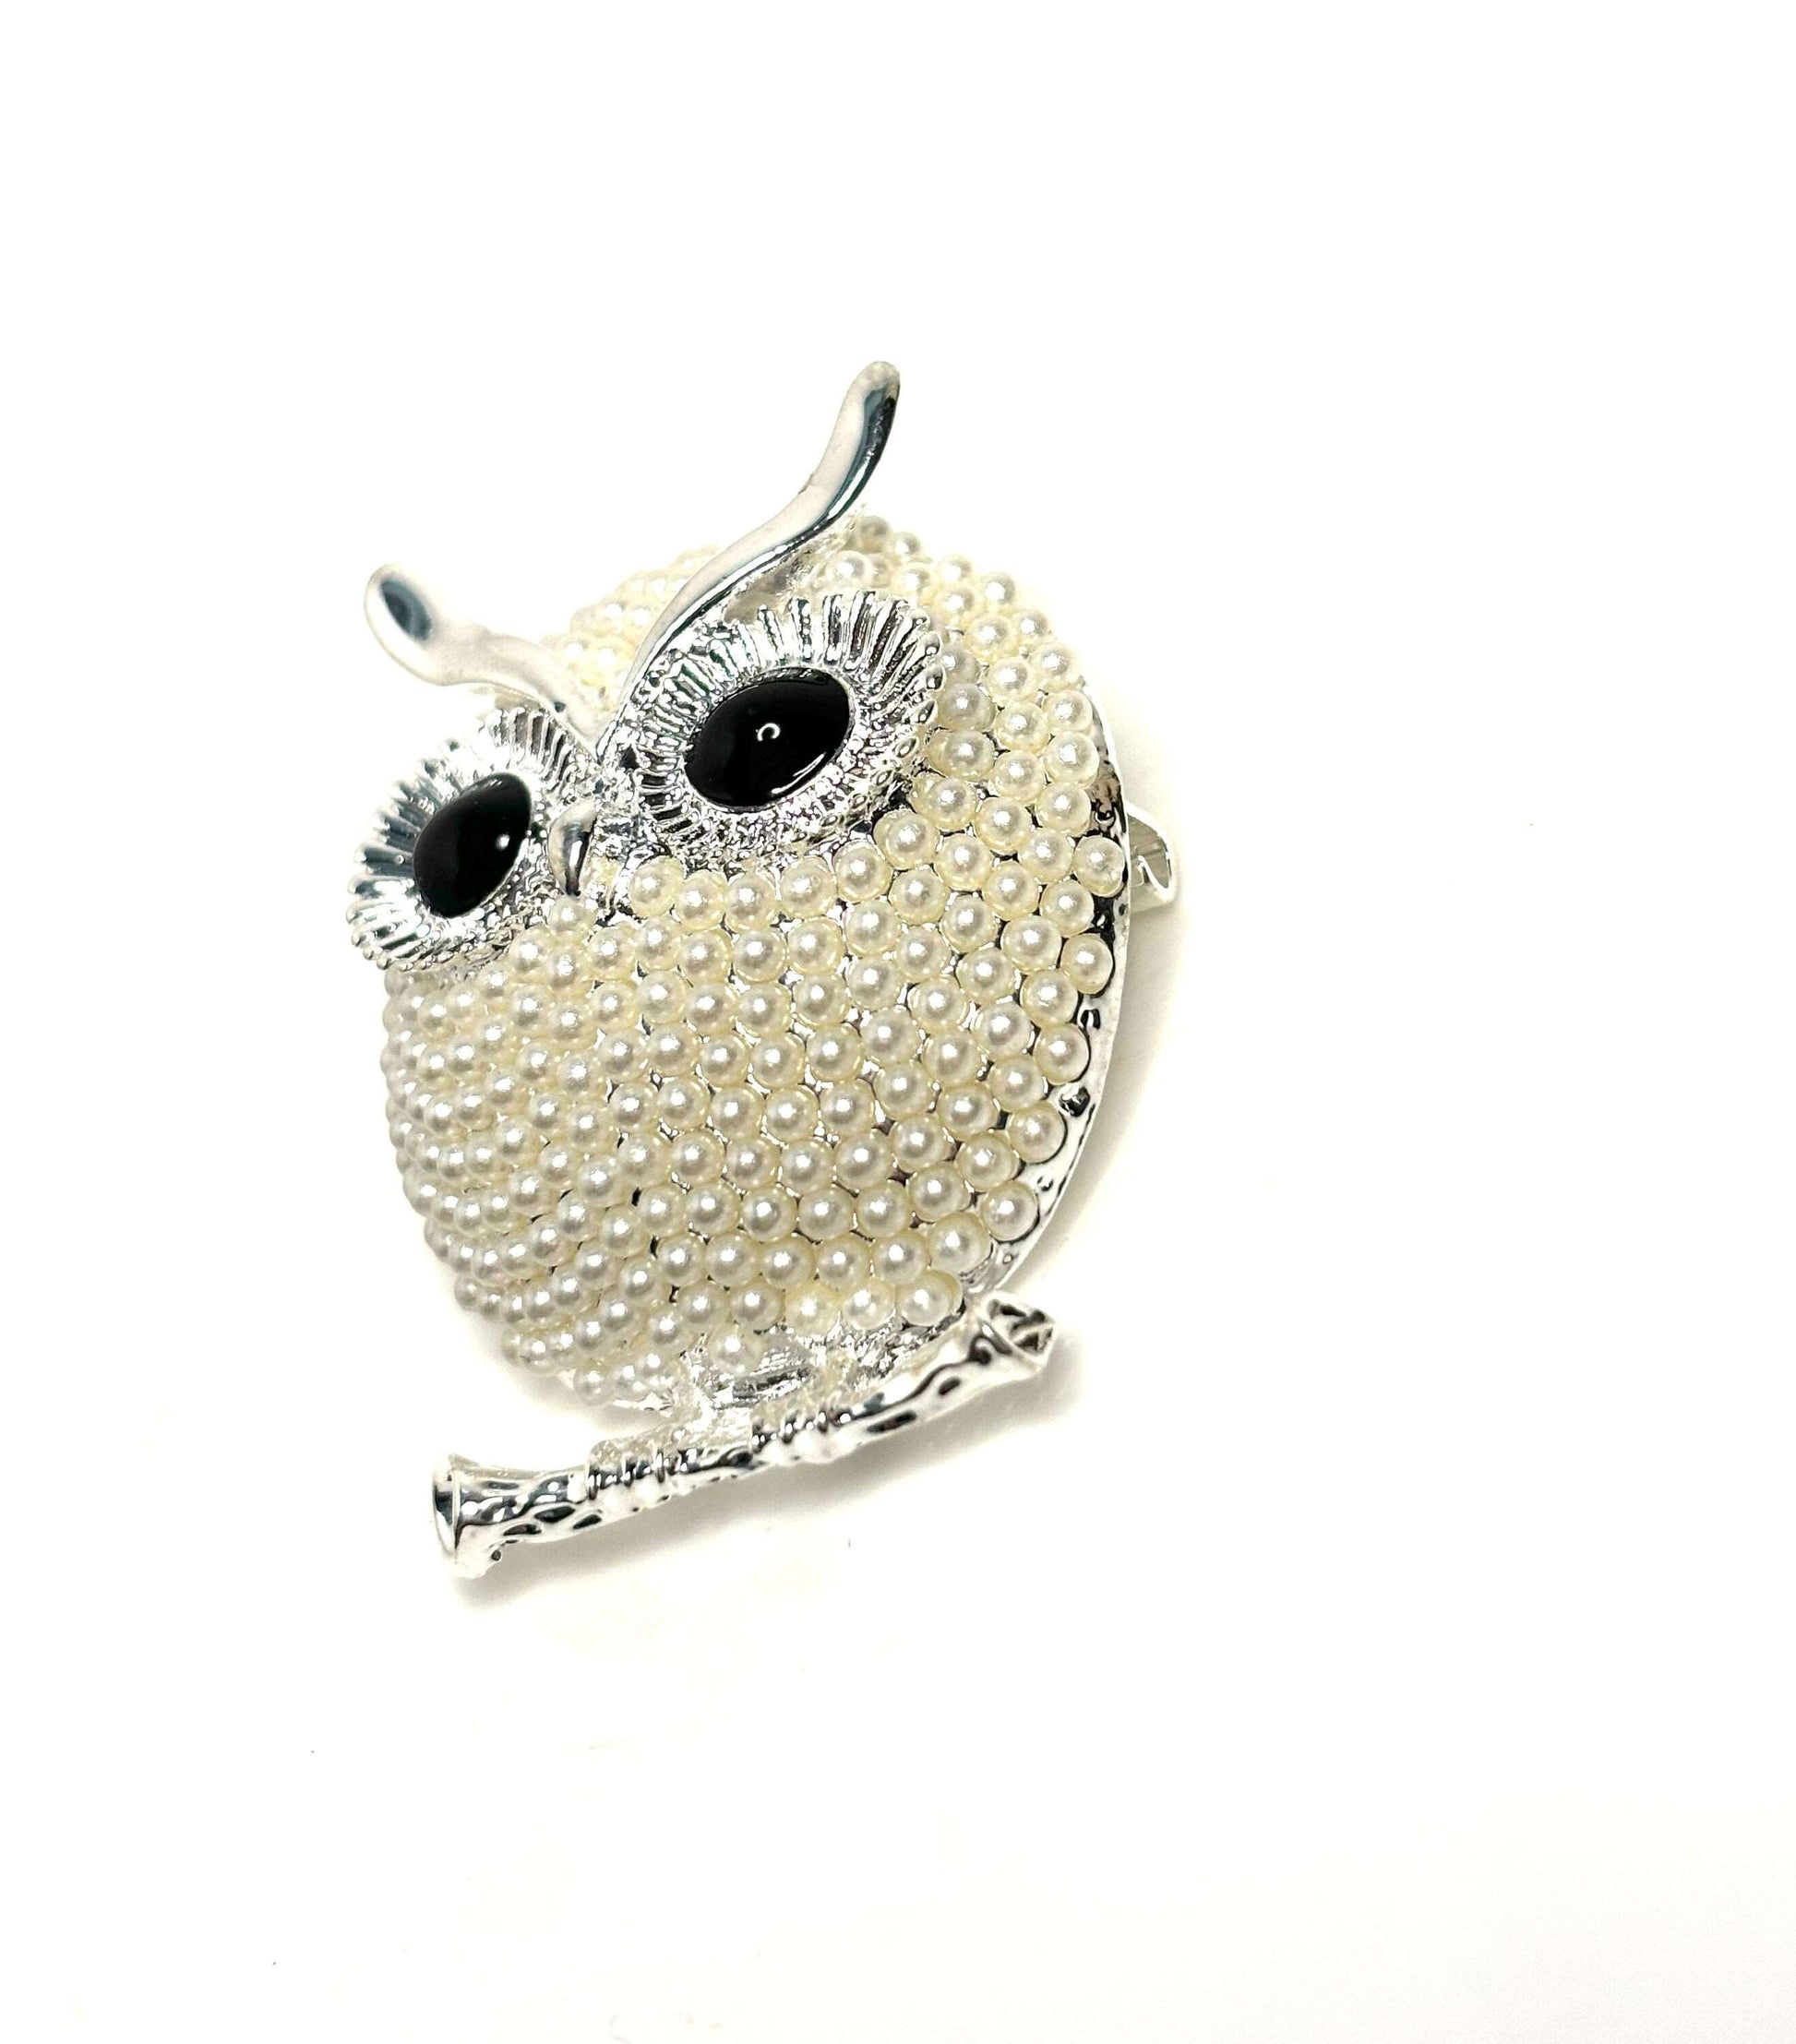 Cute Vintage Style Silver Owl Brooch, Rhinestone Crystal Pin, Owl With Pearls, Sparkly Jacket Pin, Brooches For Women